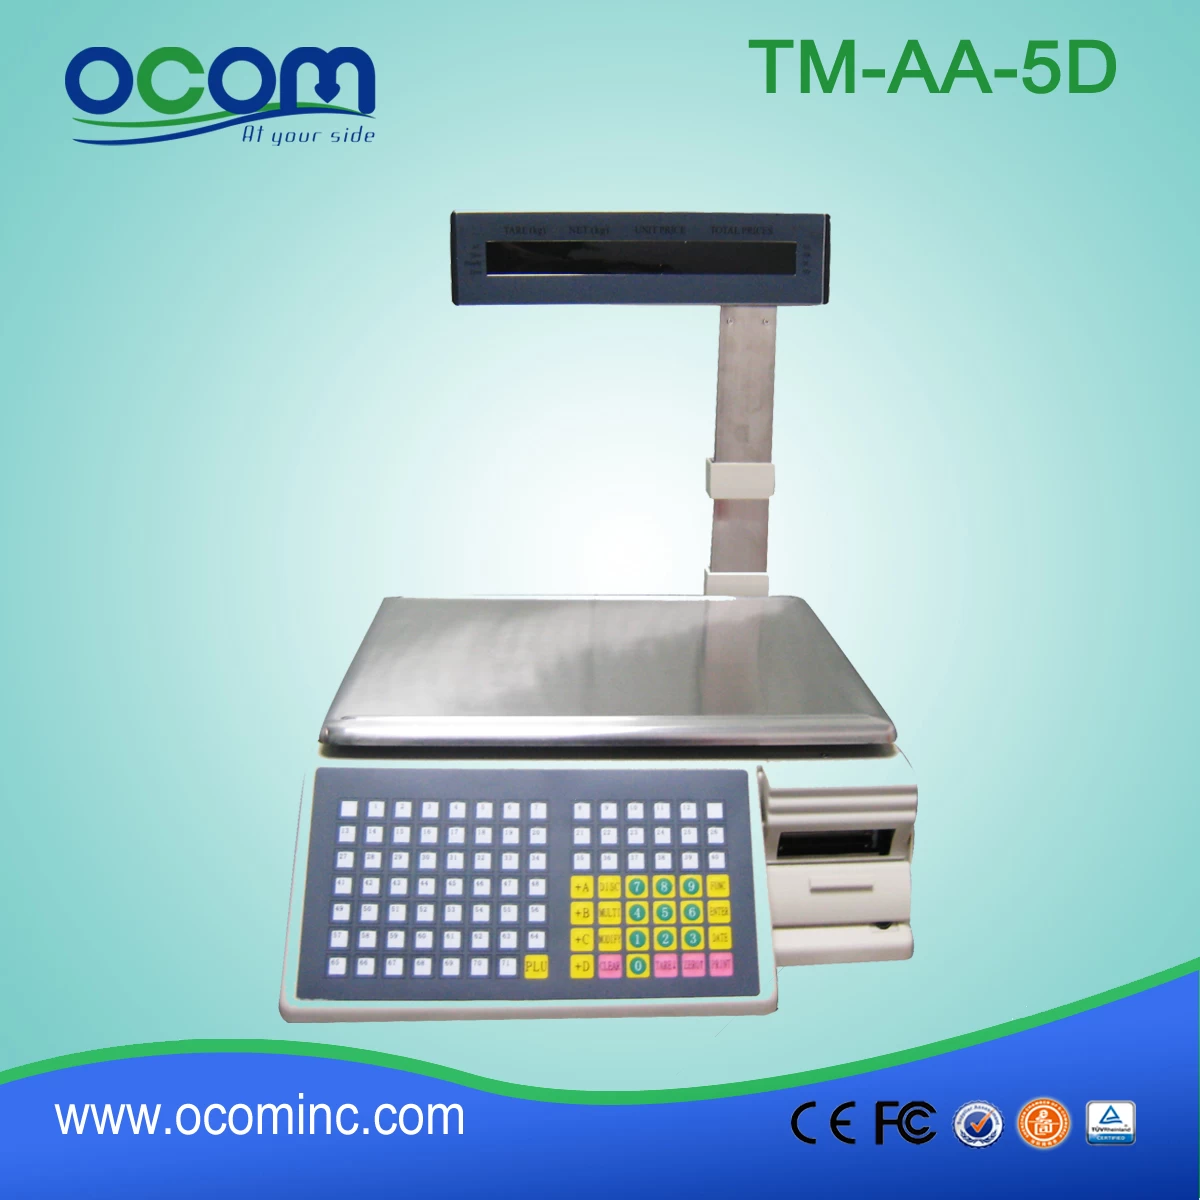 TM-AA-5D Digital Cattle Weighing Label Printer Scale with Printer